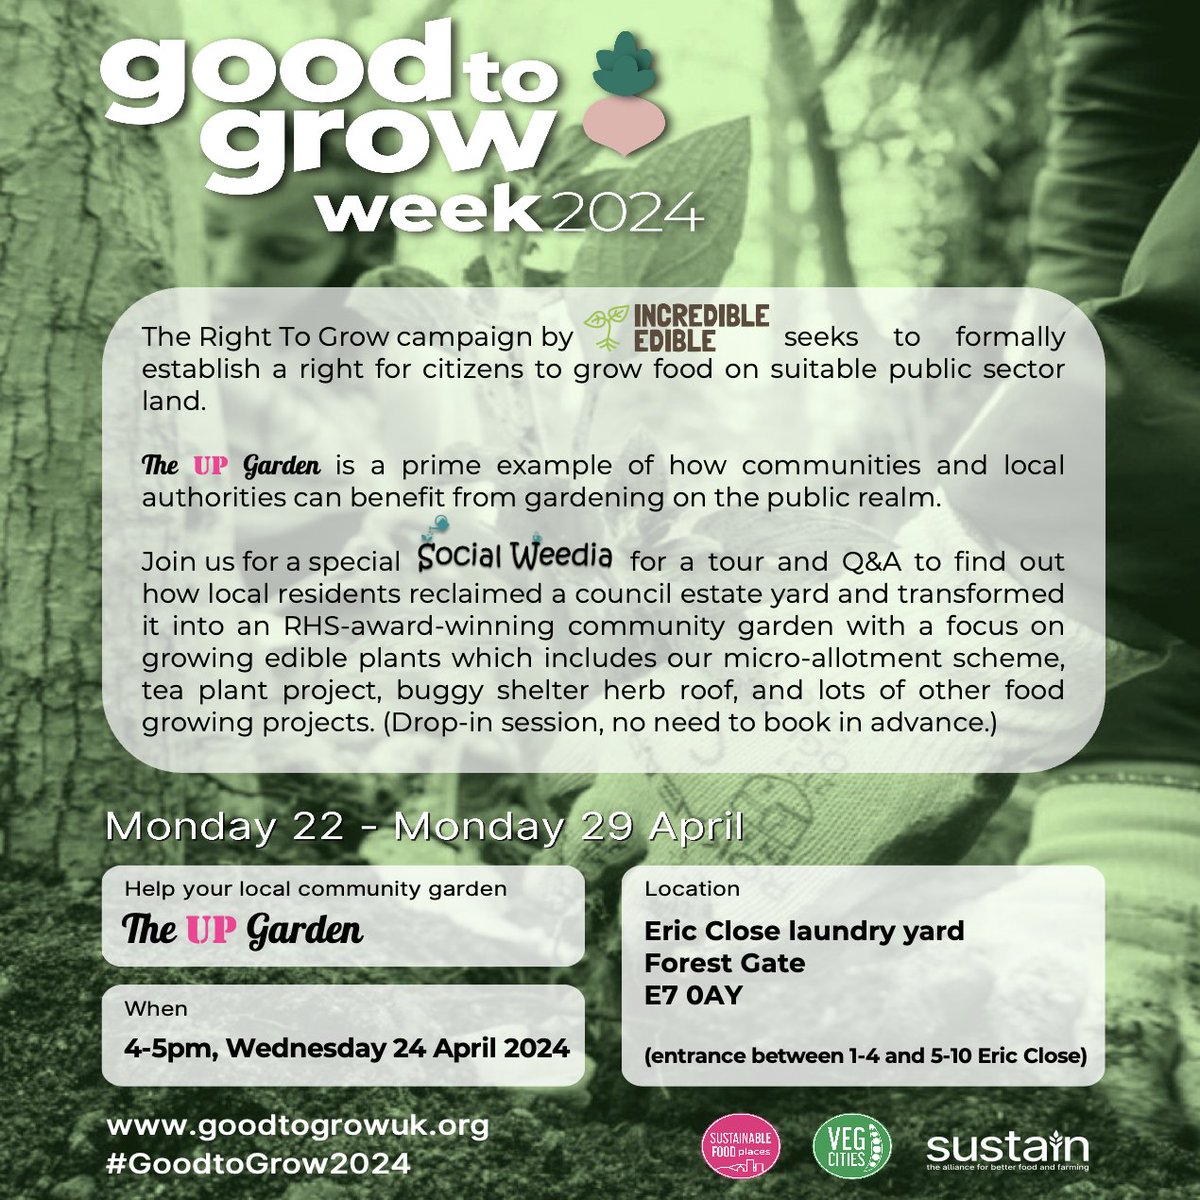 #GoodToGrowWeek will highlight a campaign for your right to grow food on suitable public sector land.

Join us on 24 April to find out how we reclaimed a council estate yard & transformed it into an RHS-award-winning community garden (with micro-allotments)!